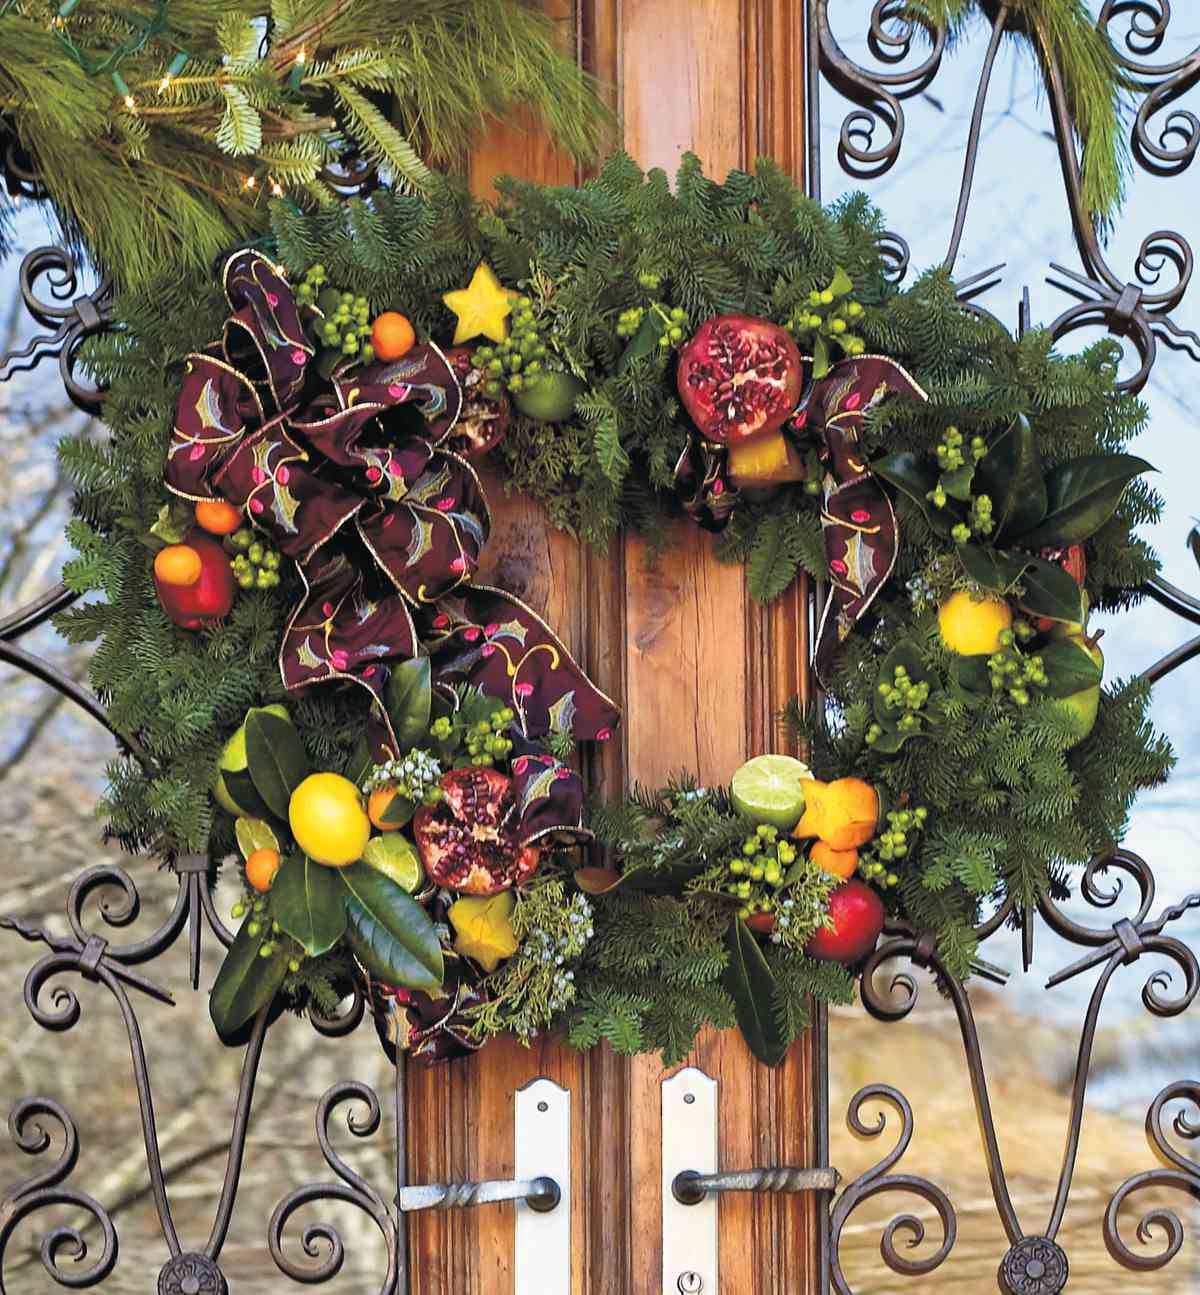 Try a Two-Piece Wreath